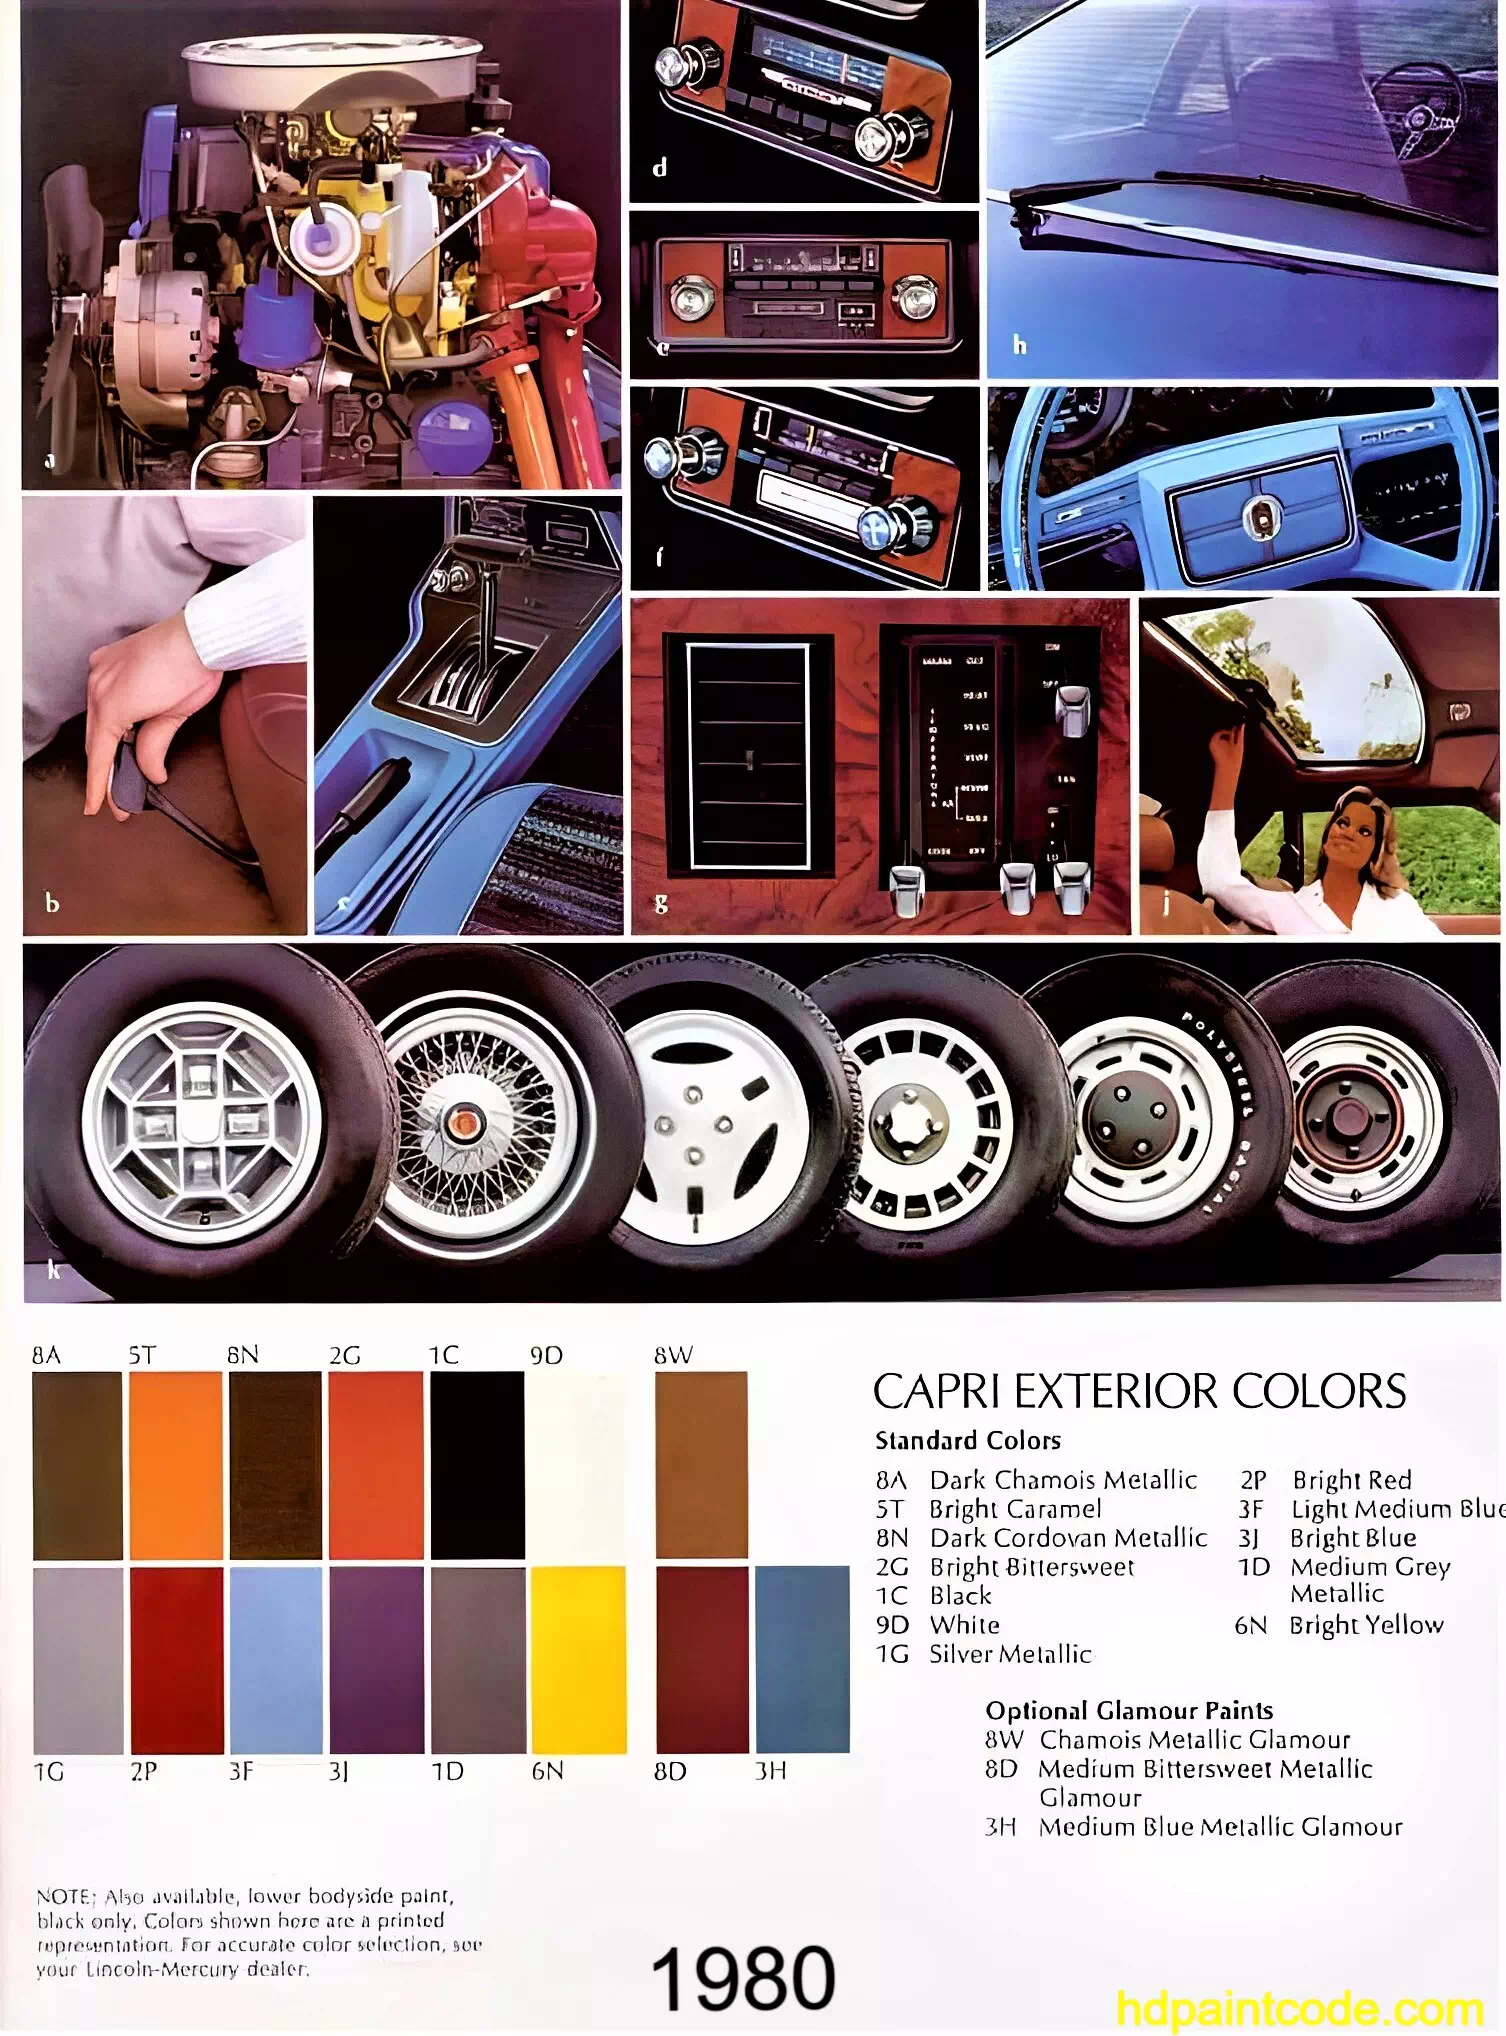 Paint codes, Exterior Colors, and Vehicle Rims used on the 1980 Mercury Capri automobiles